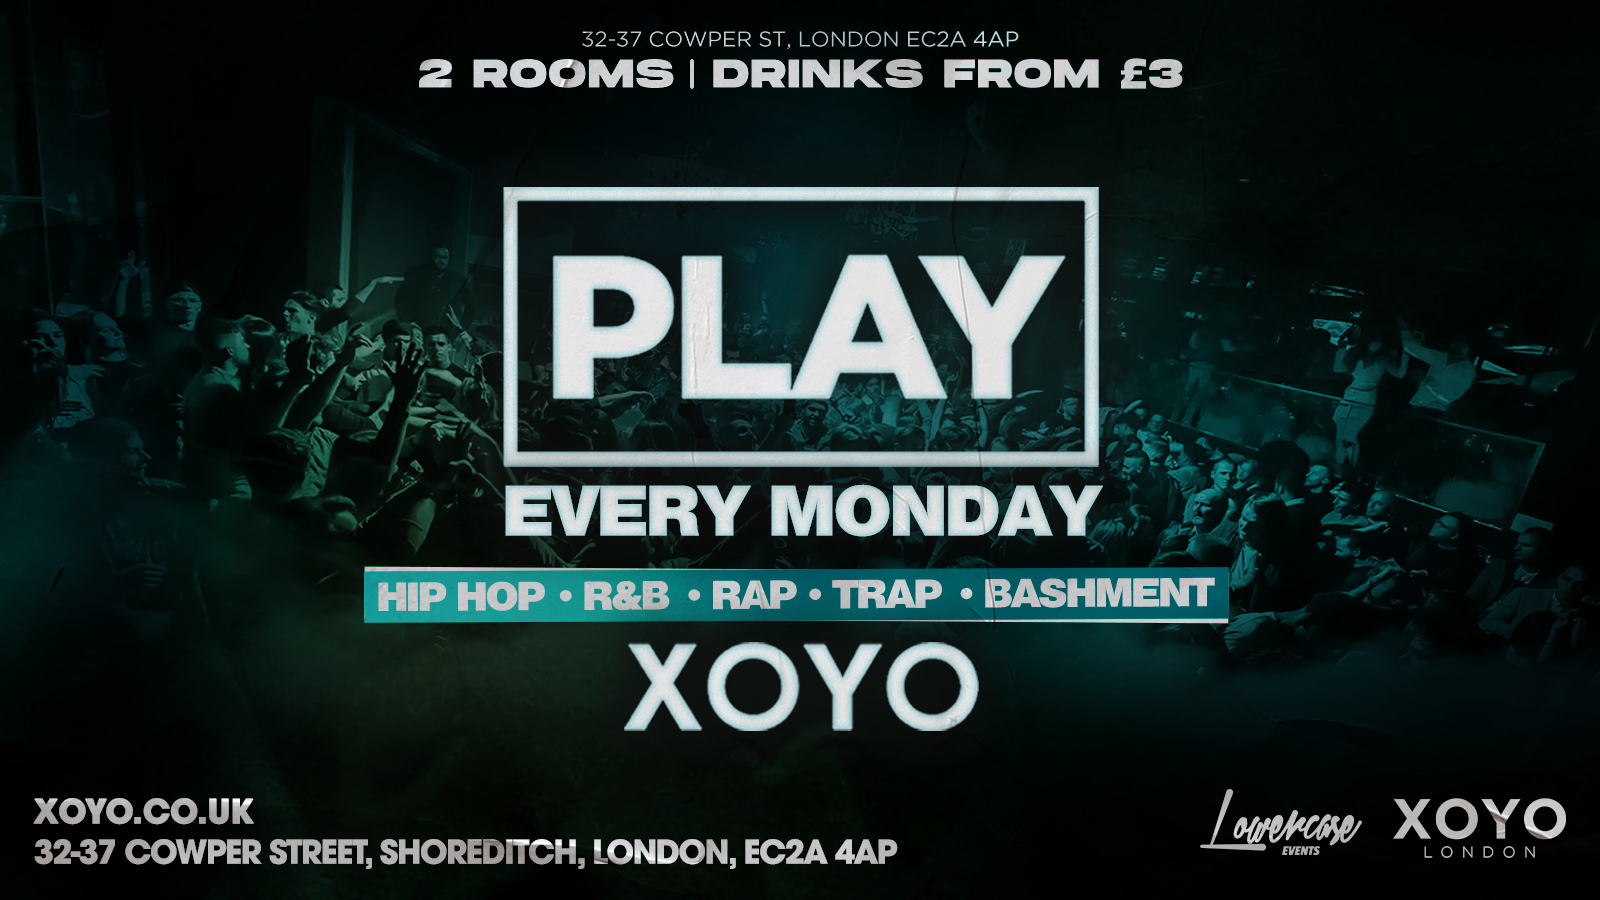 Join us EVERY Monday at XOYO London for PLAY, a night of Hip-hop and R&B!